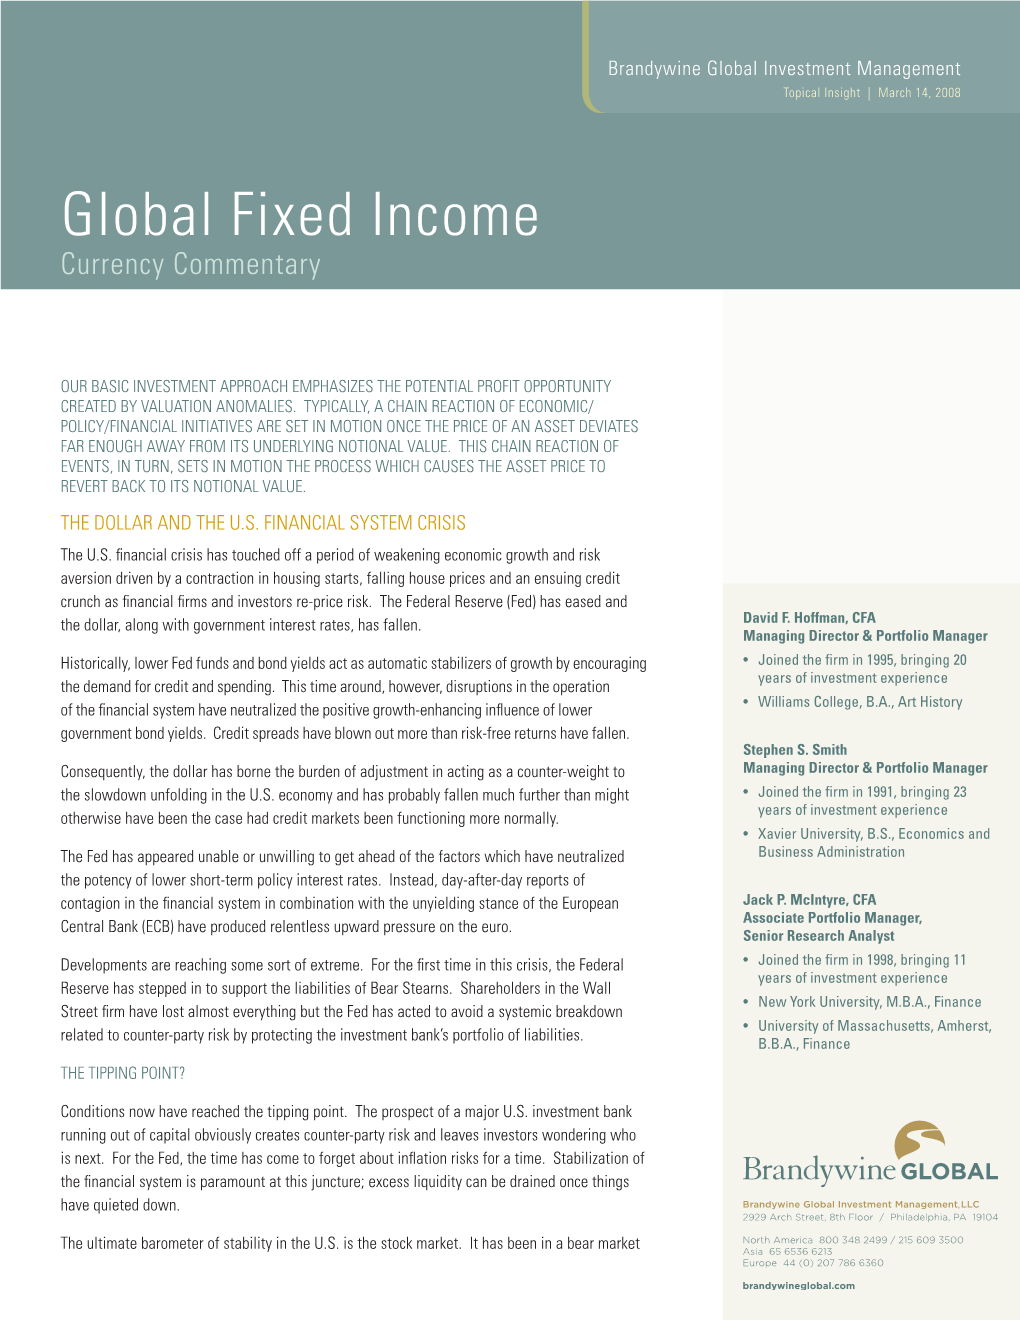 Global Fixed Income Currency Commentary